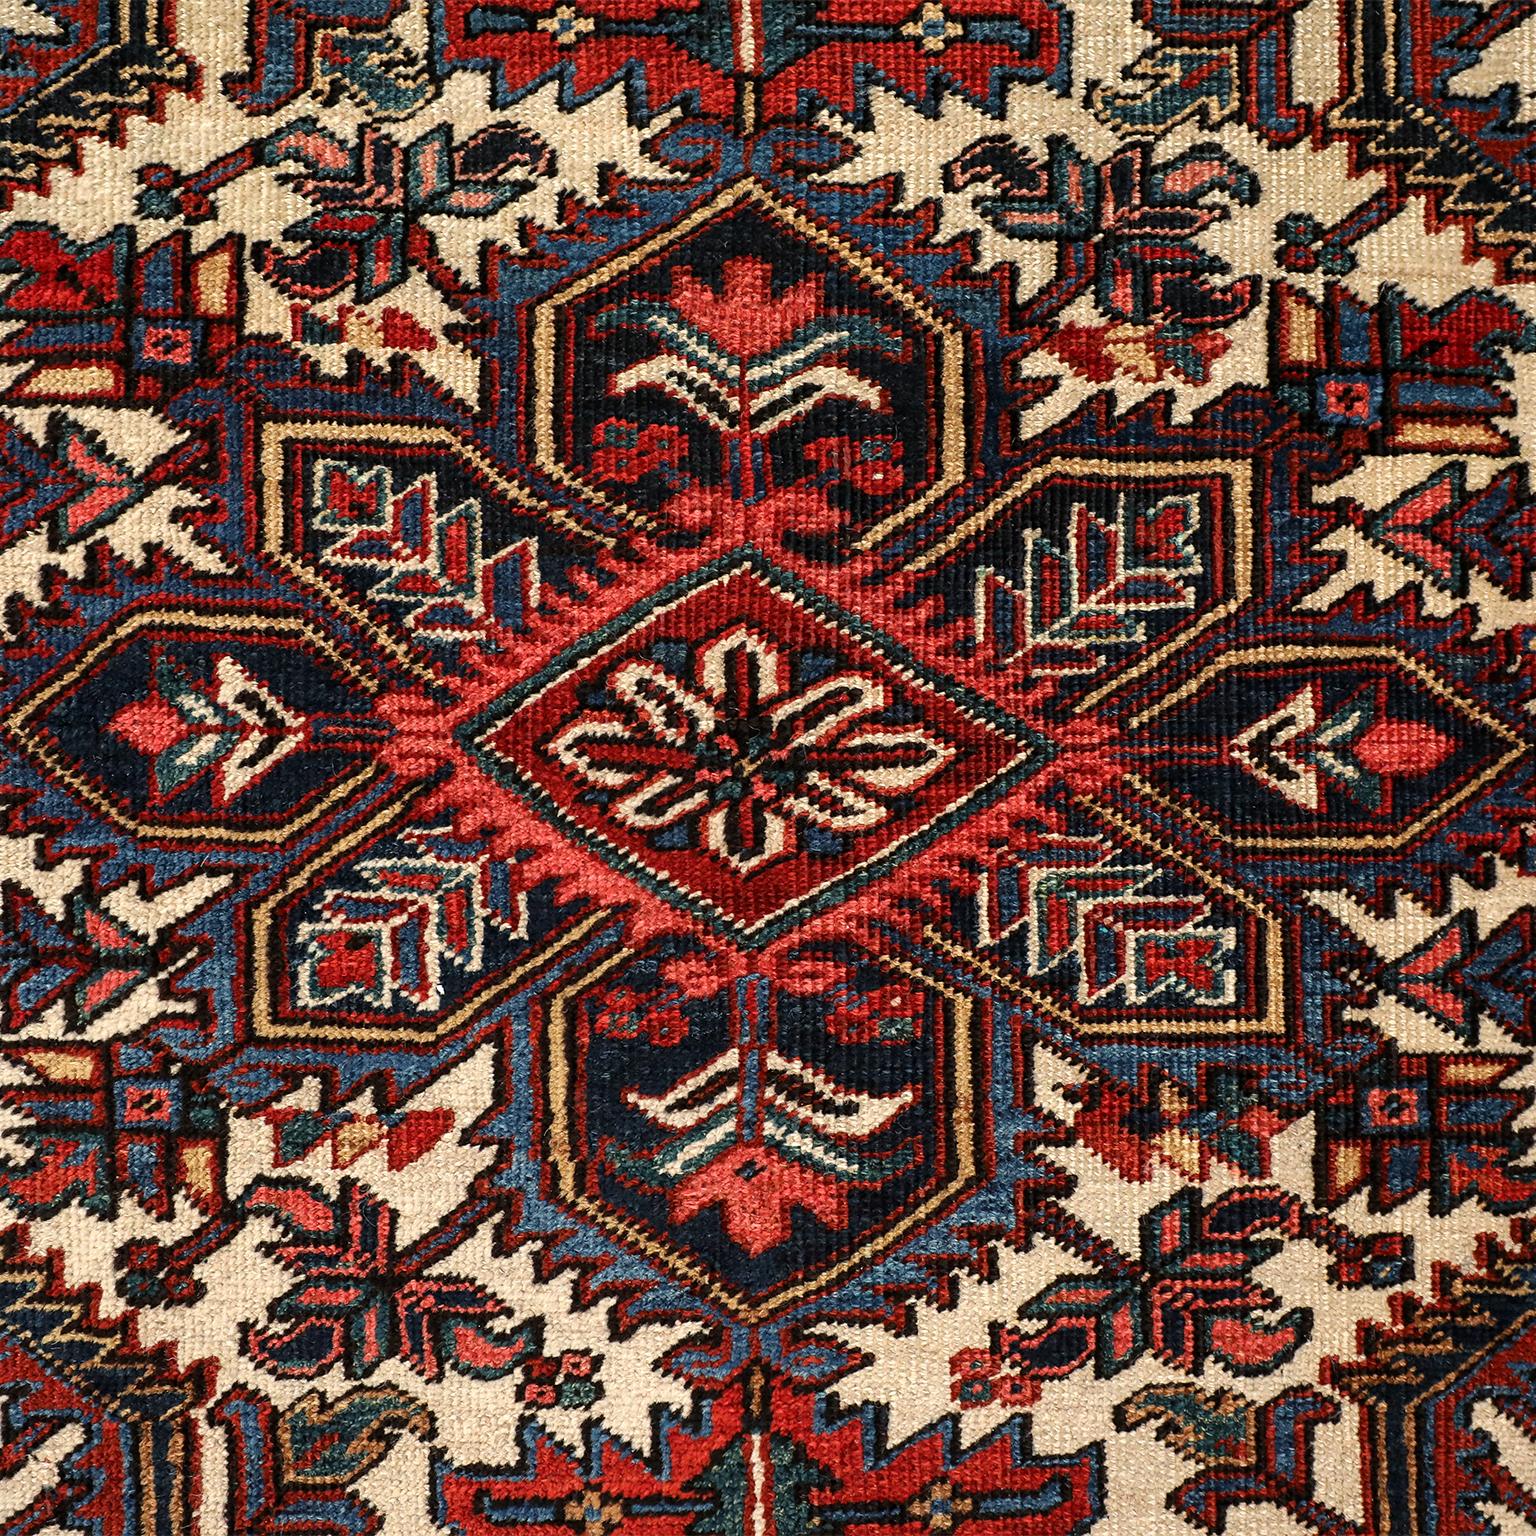 This vintage Heriz Persian carpet circa 1920s in pure wool and vegetable dyes is hand knotted using a Persian knot upon a cotton warp and weft. It features a brightly colored geometric floral medallion upon a cream-colored field, with a